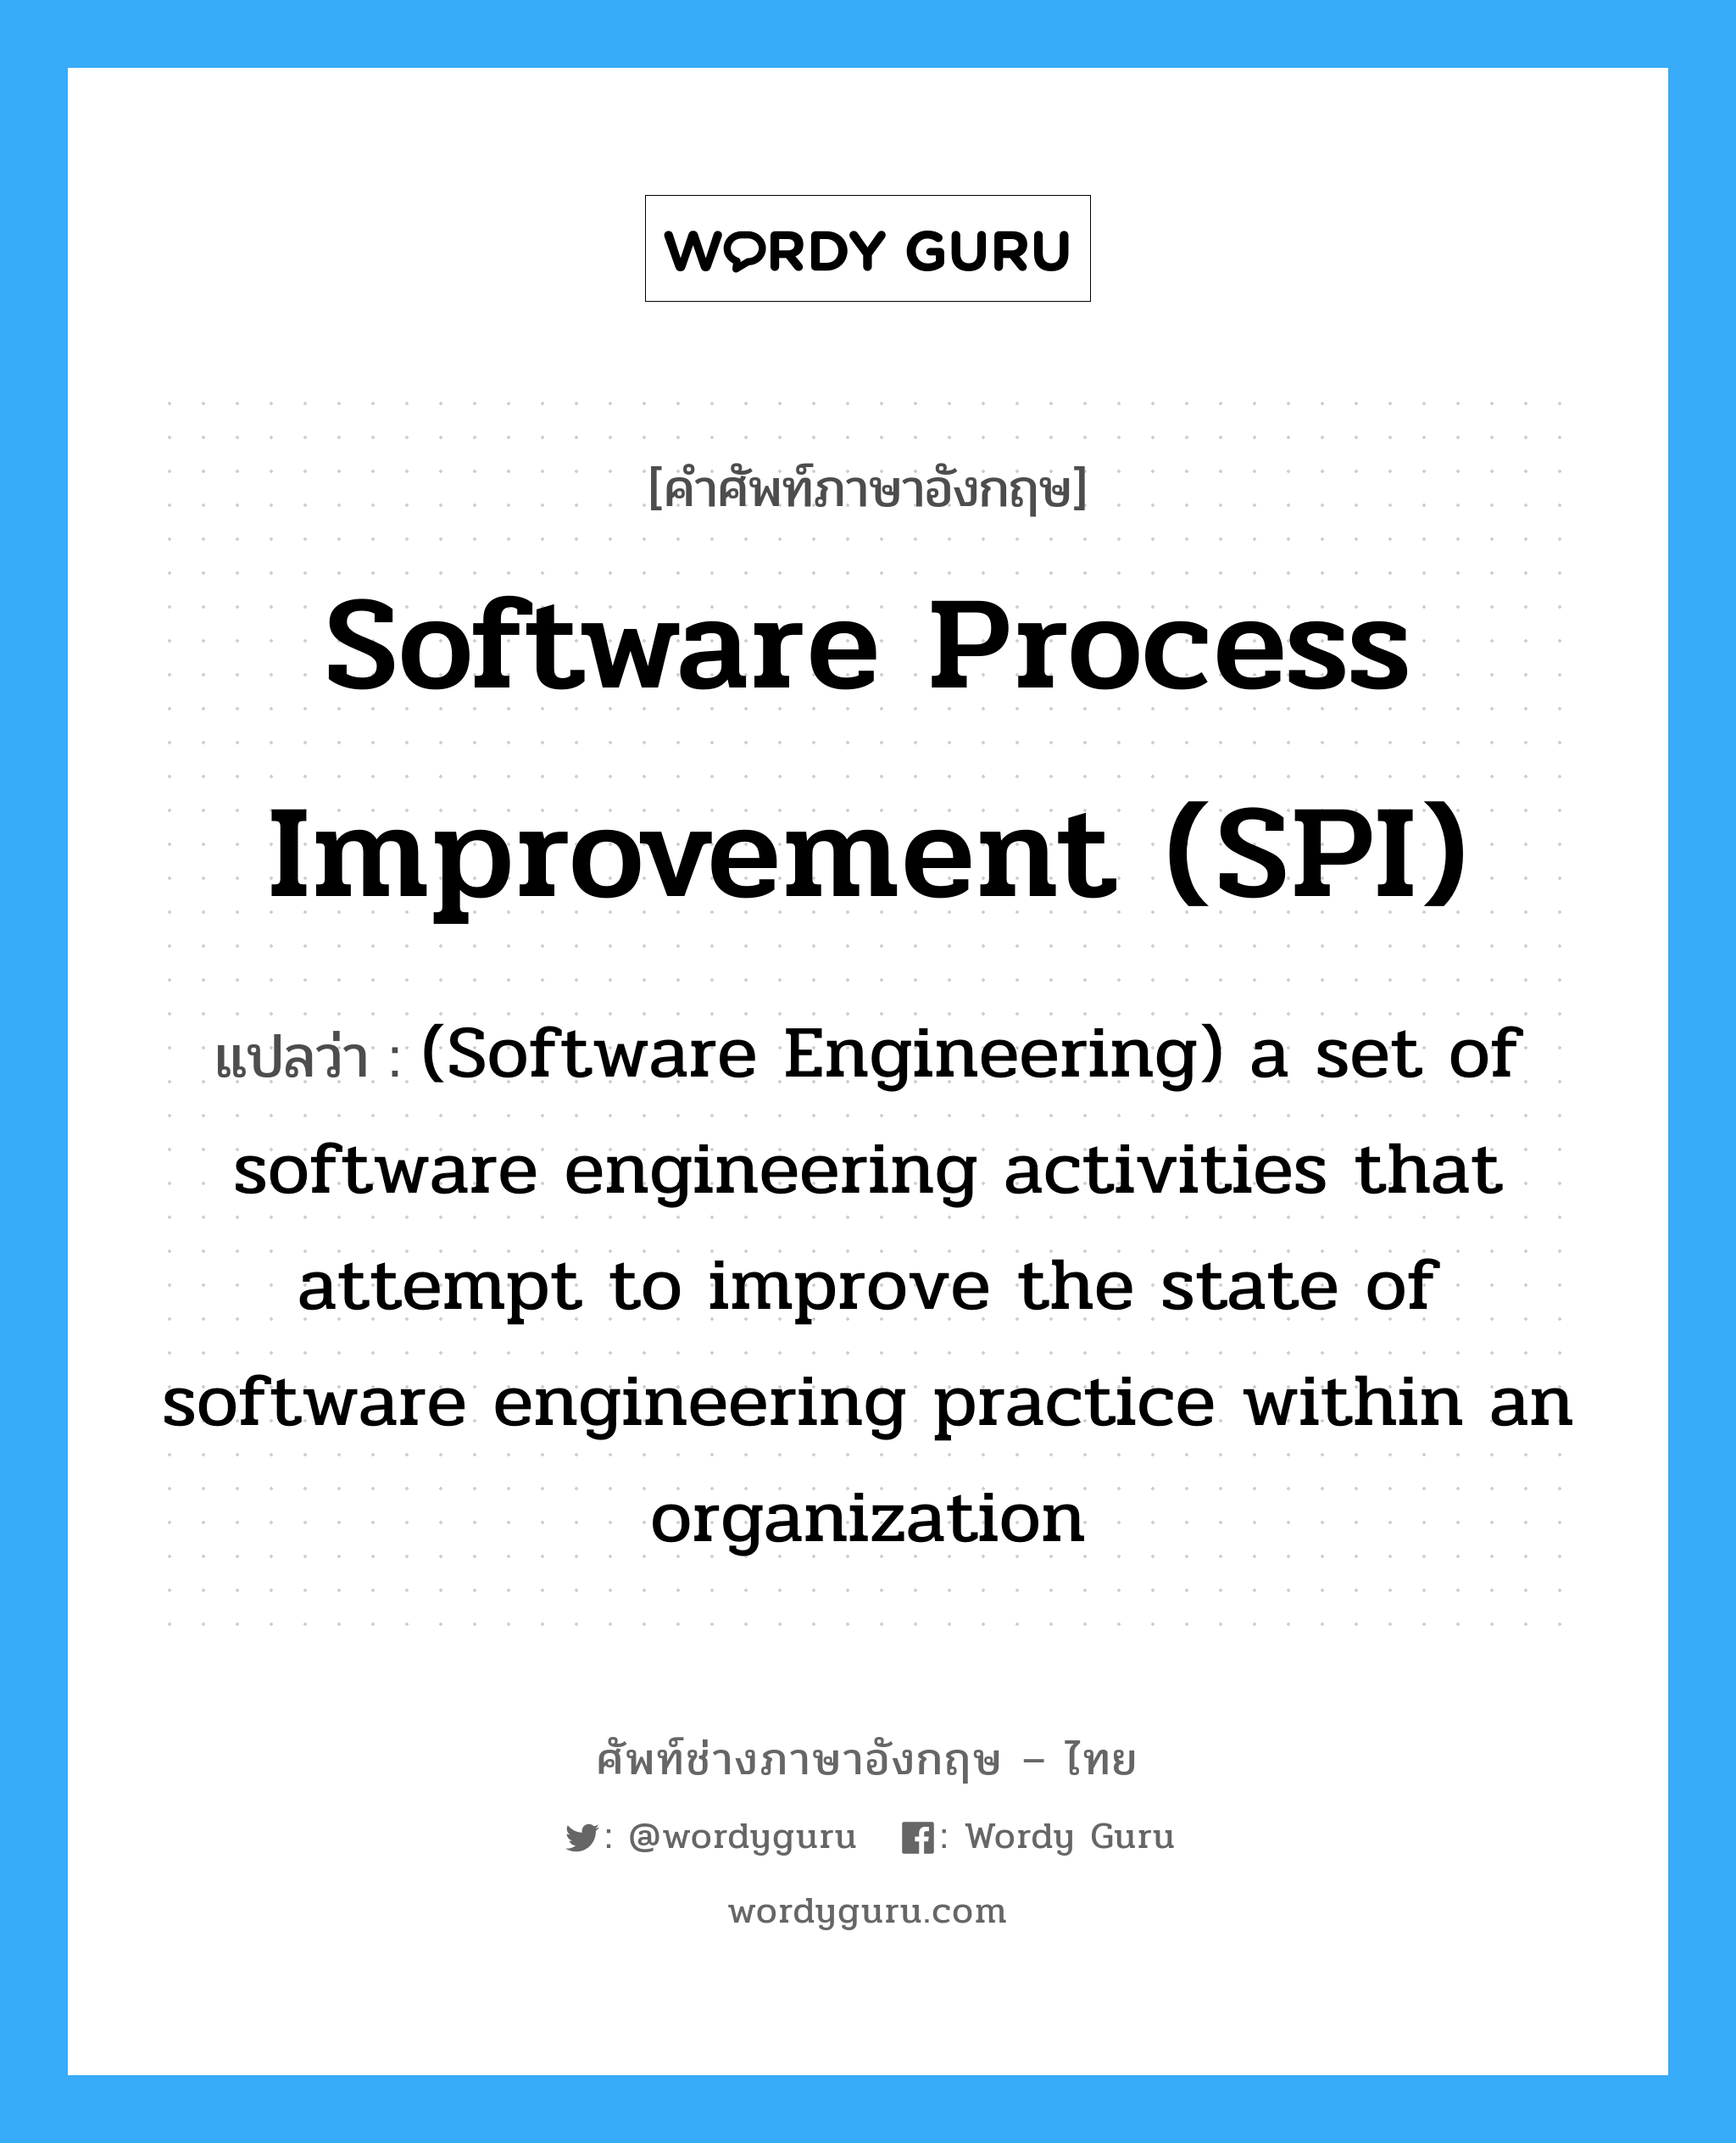 (Software Engineering) a set of software engineering activities that attempt to improve the state of software engineering practice within an organization ภาษาอังกฤษ?, คำศัพท์ช่างภาษาอังกฤษ - ไทย (Software Engineering) a set of software engineering activities that attempt to improve the state of software engineering practice within an organization คำศัพท์ภาษาอังกฤษ (Software Engineering) a set of software engineering activities that attempt to improve the state of software engineering practice within an organization แปลว่า Software process improvement (SPI)